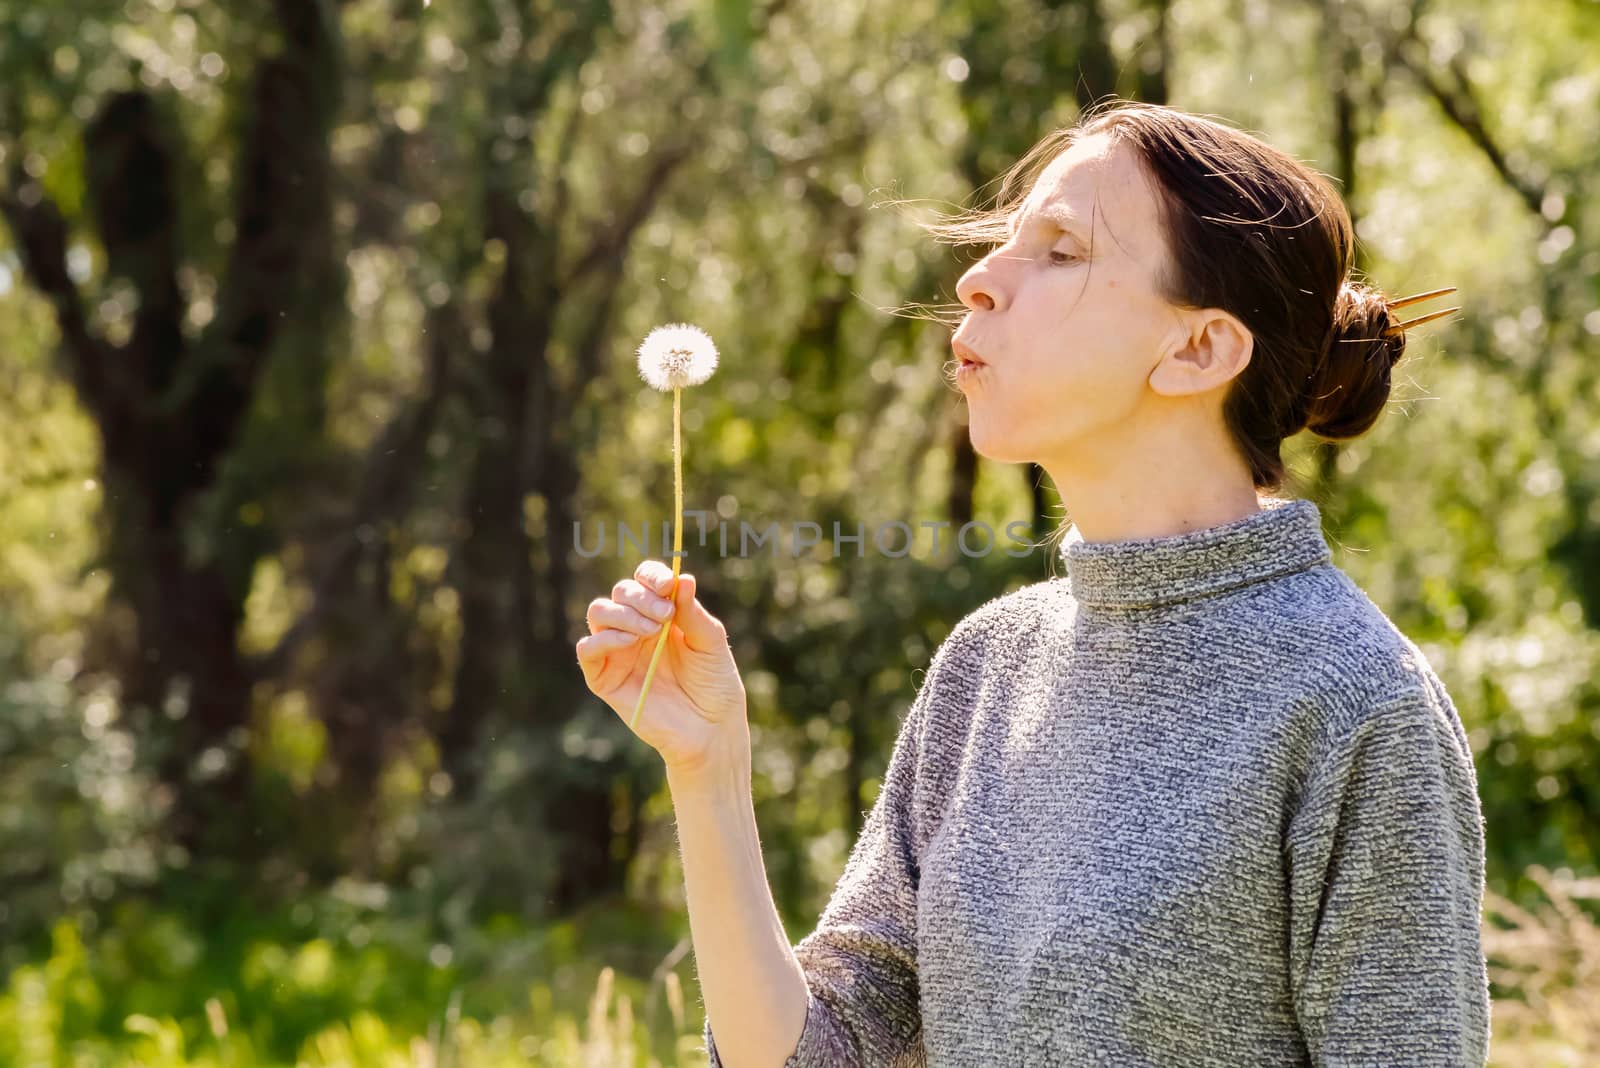 Woman and Blowball (Dandelion) by MaxalTamor